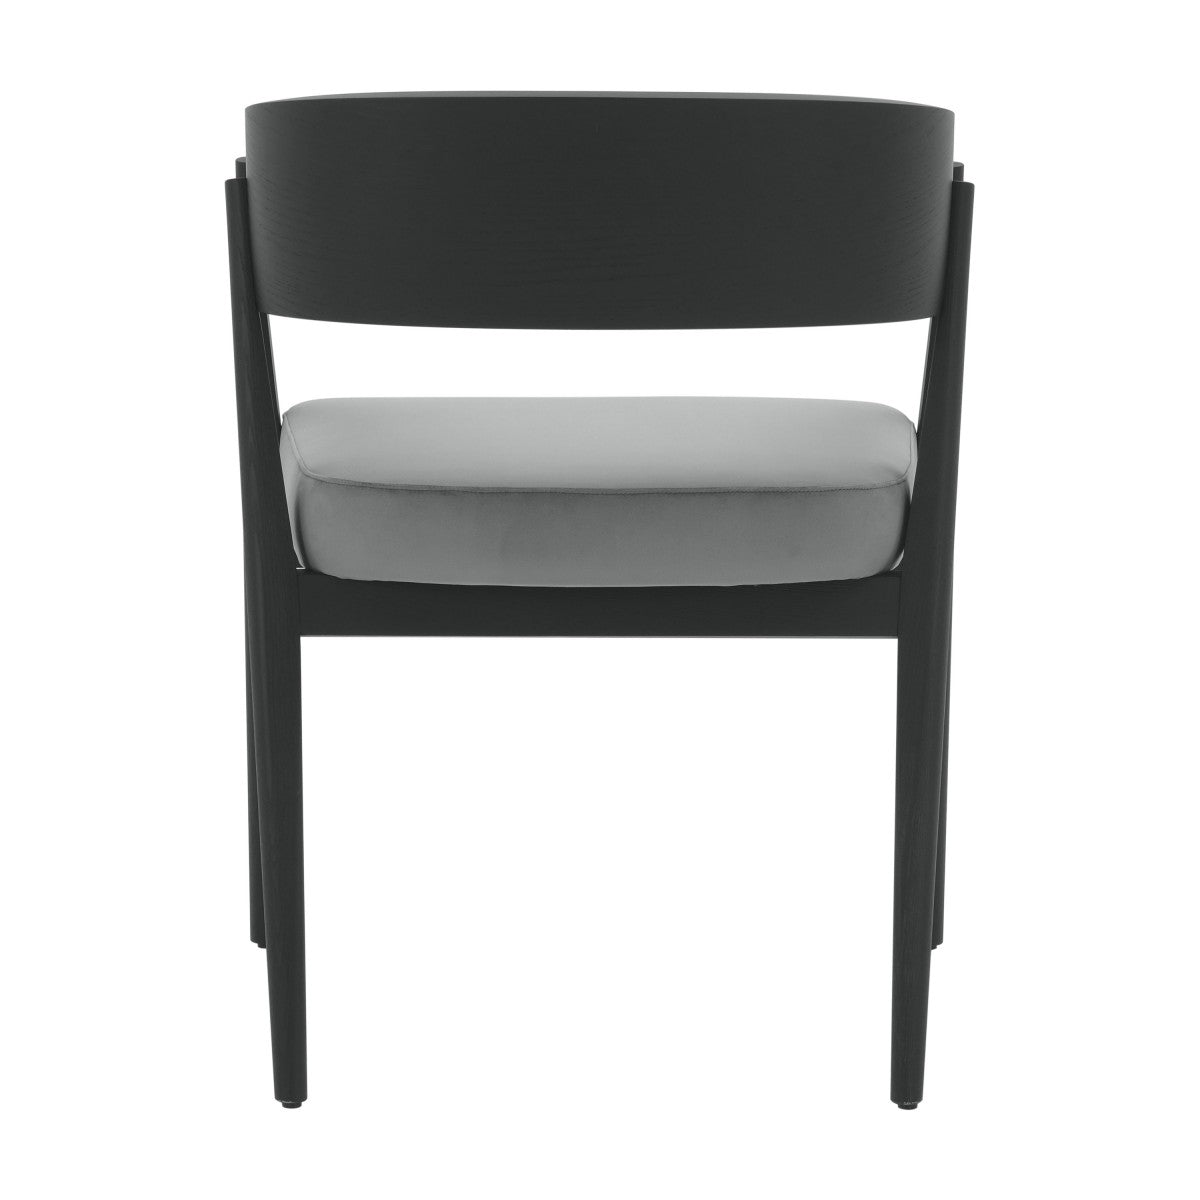 Afina Bespoke Upholstered Modern Contemporary Dining Armchair Chair MS014A Custom Made To Order